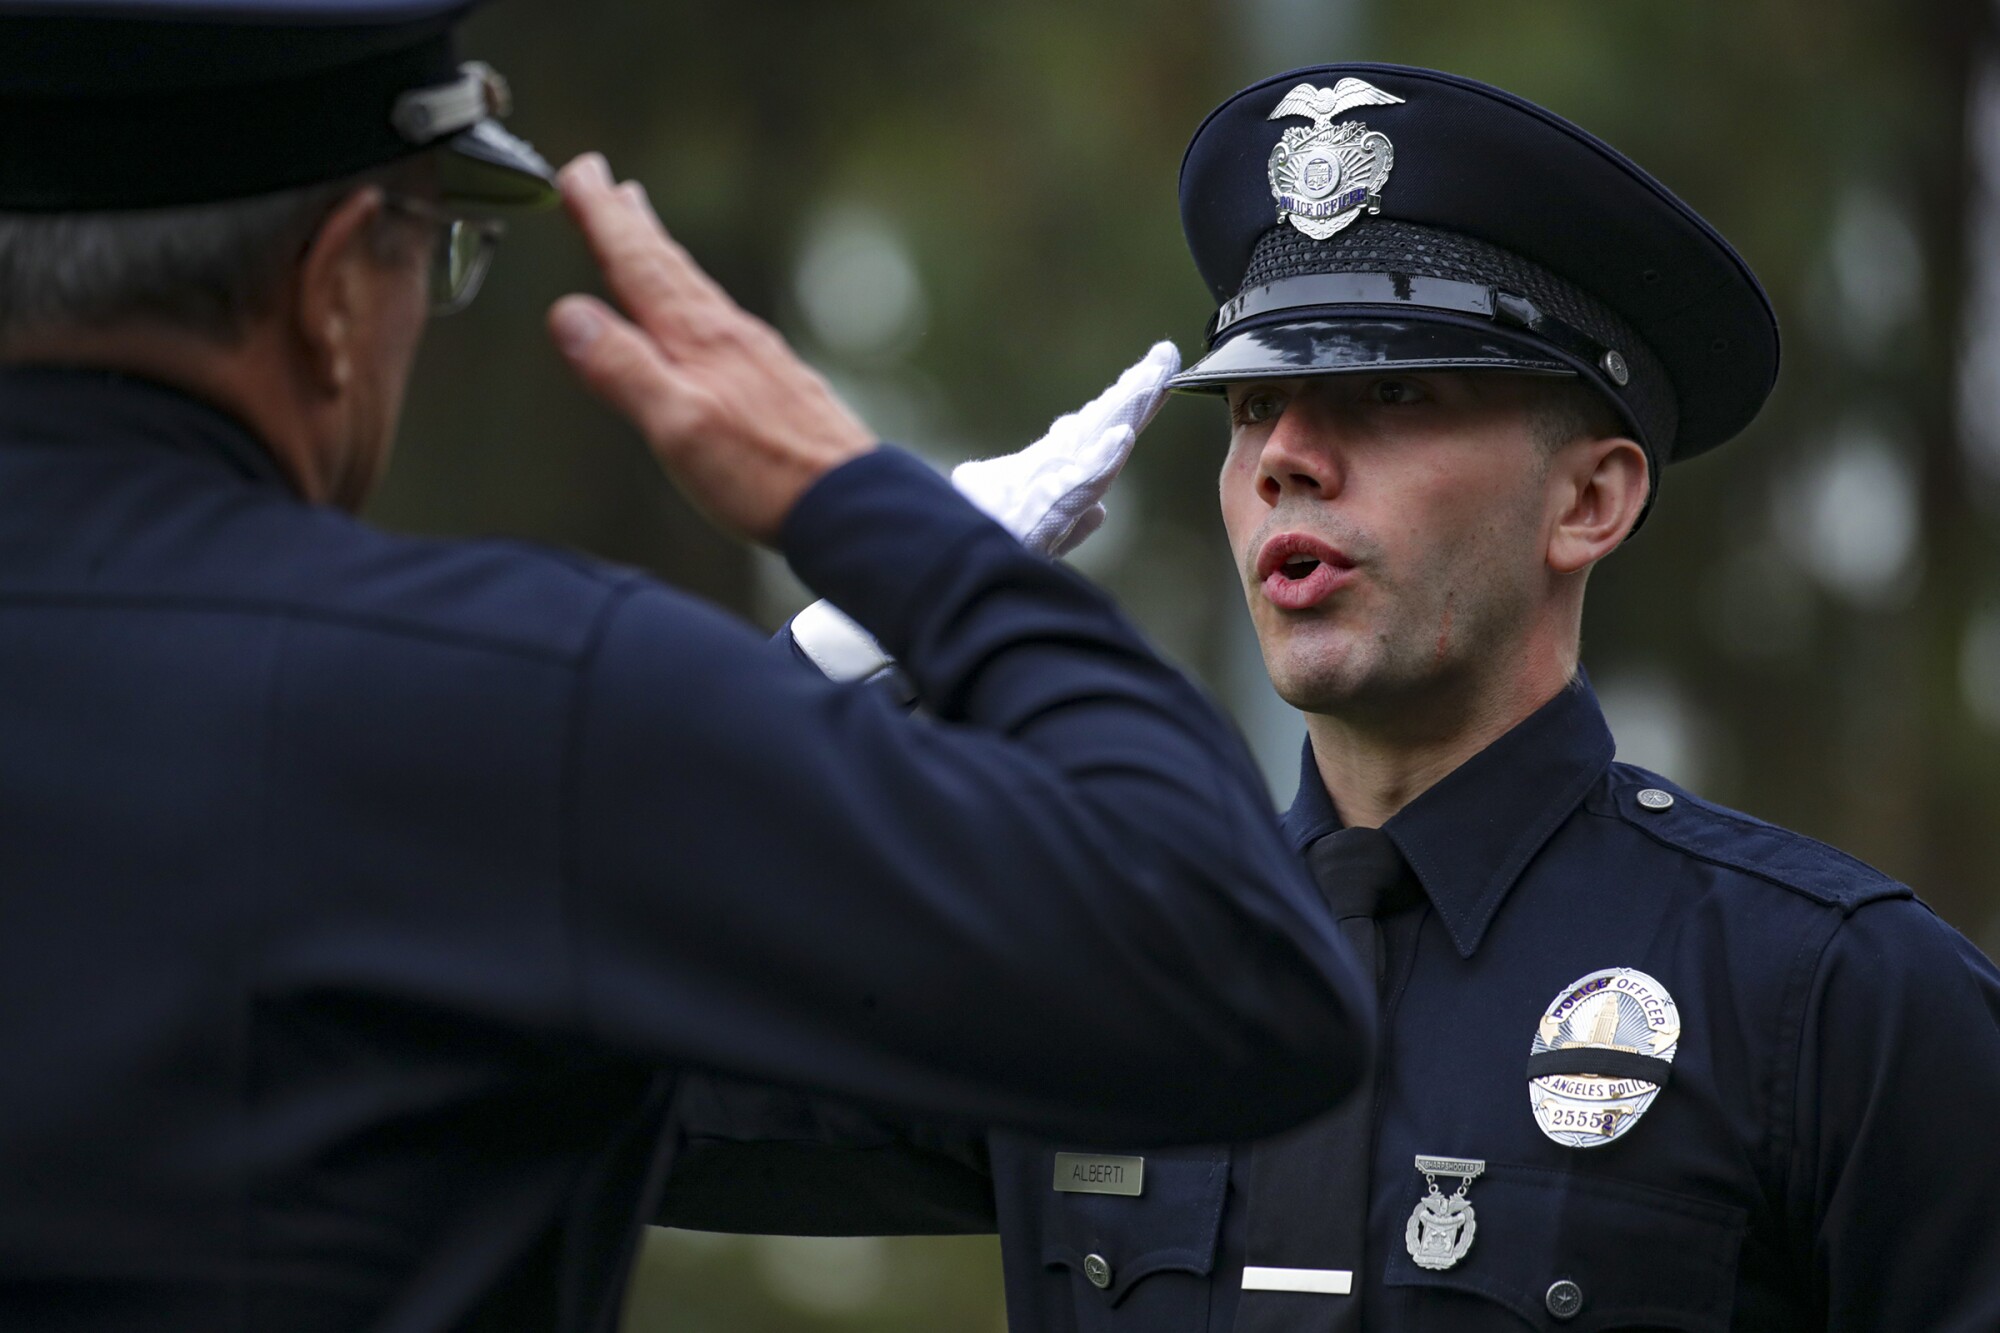 New graduate officer Aaron Alberti, right, salutes LAPD Chief Michel Moore before receiving his diploma.